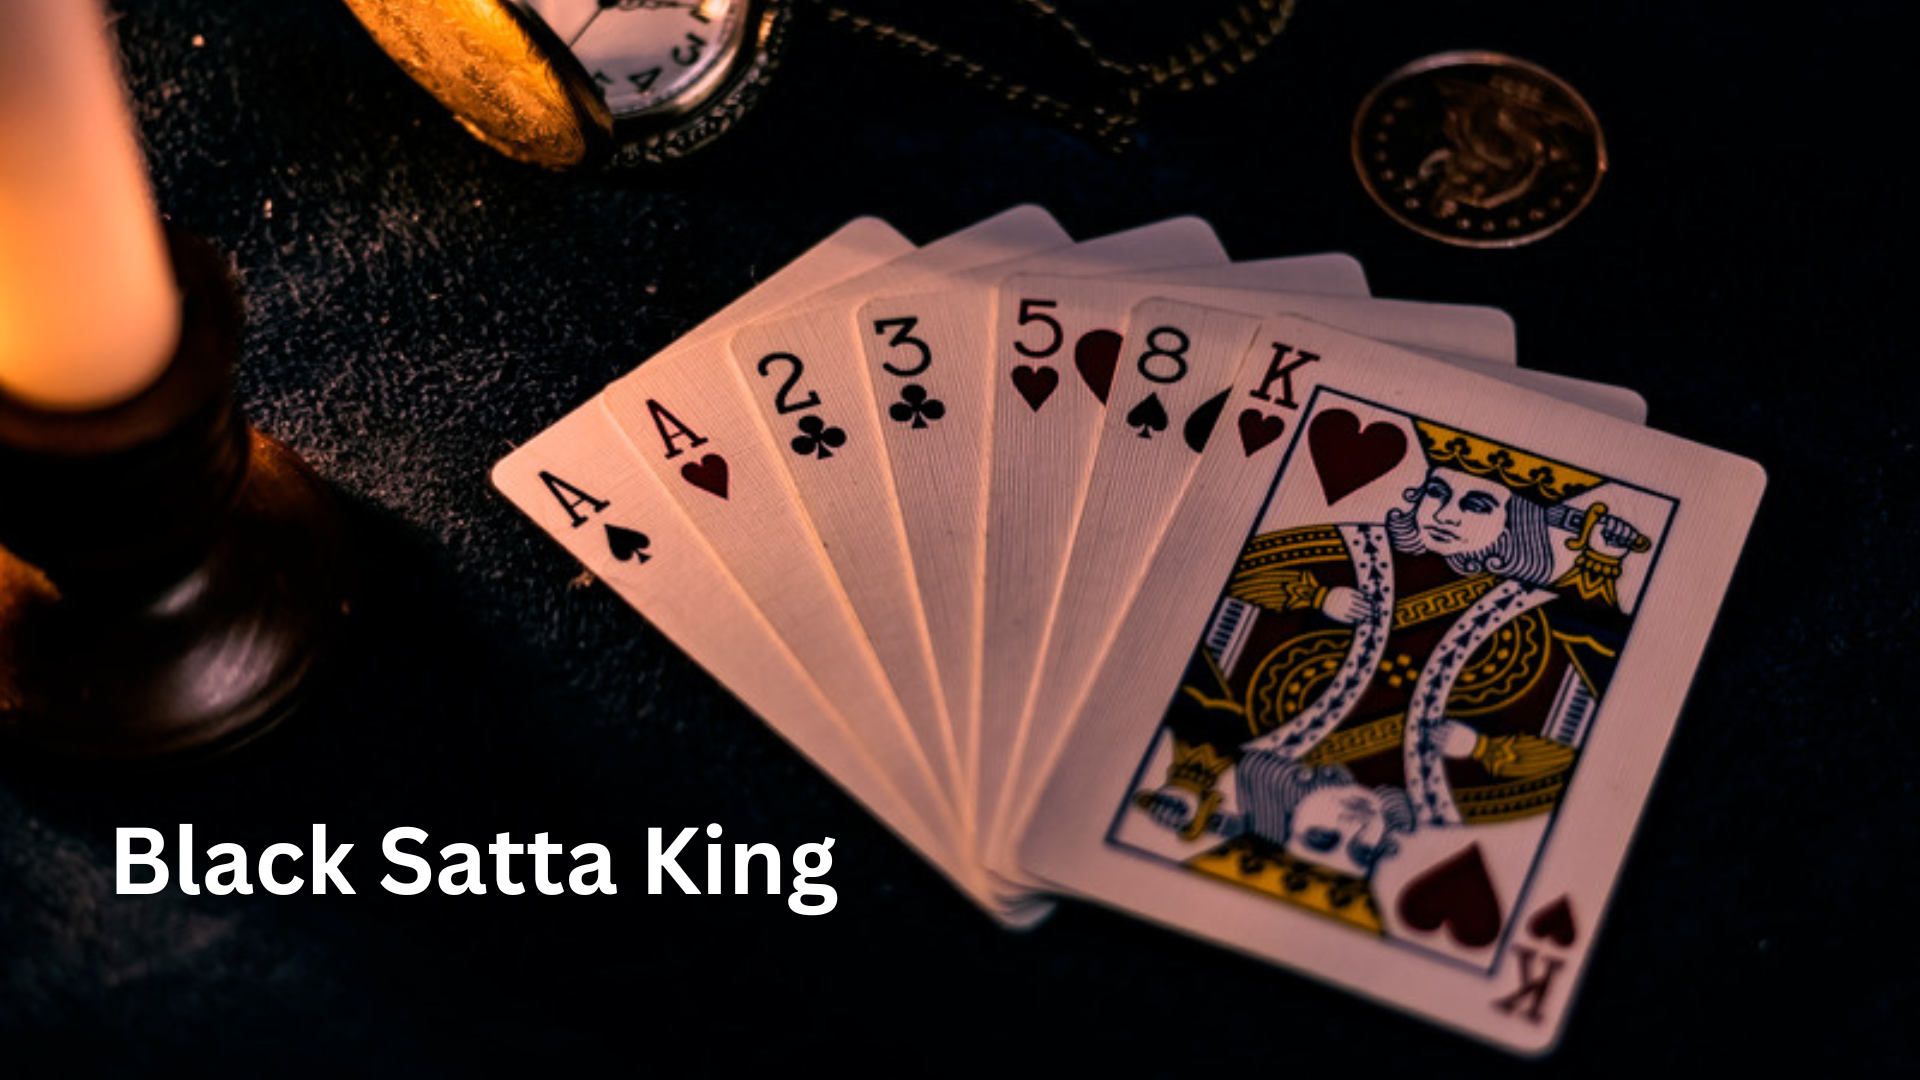 Some Important Things you need to know About Black Satta King